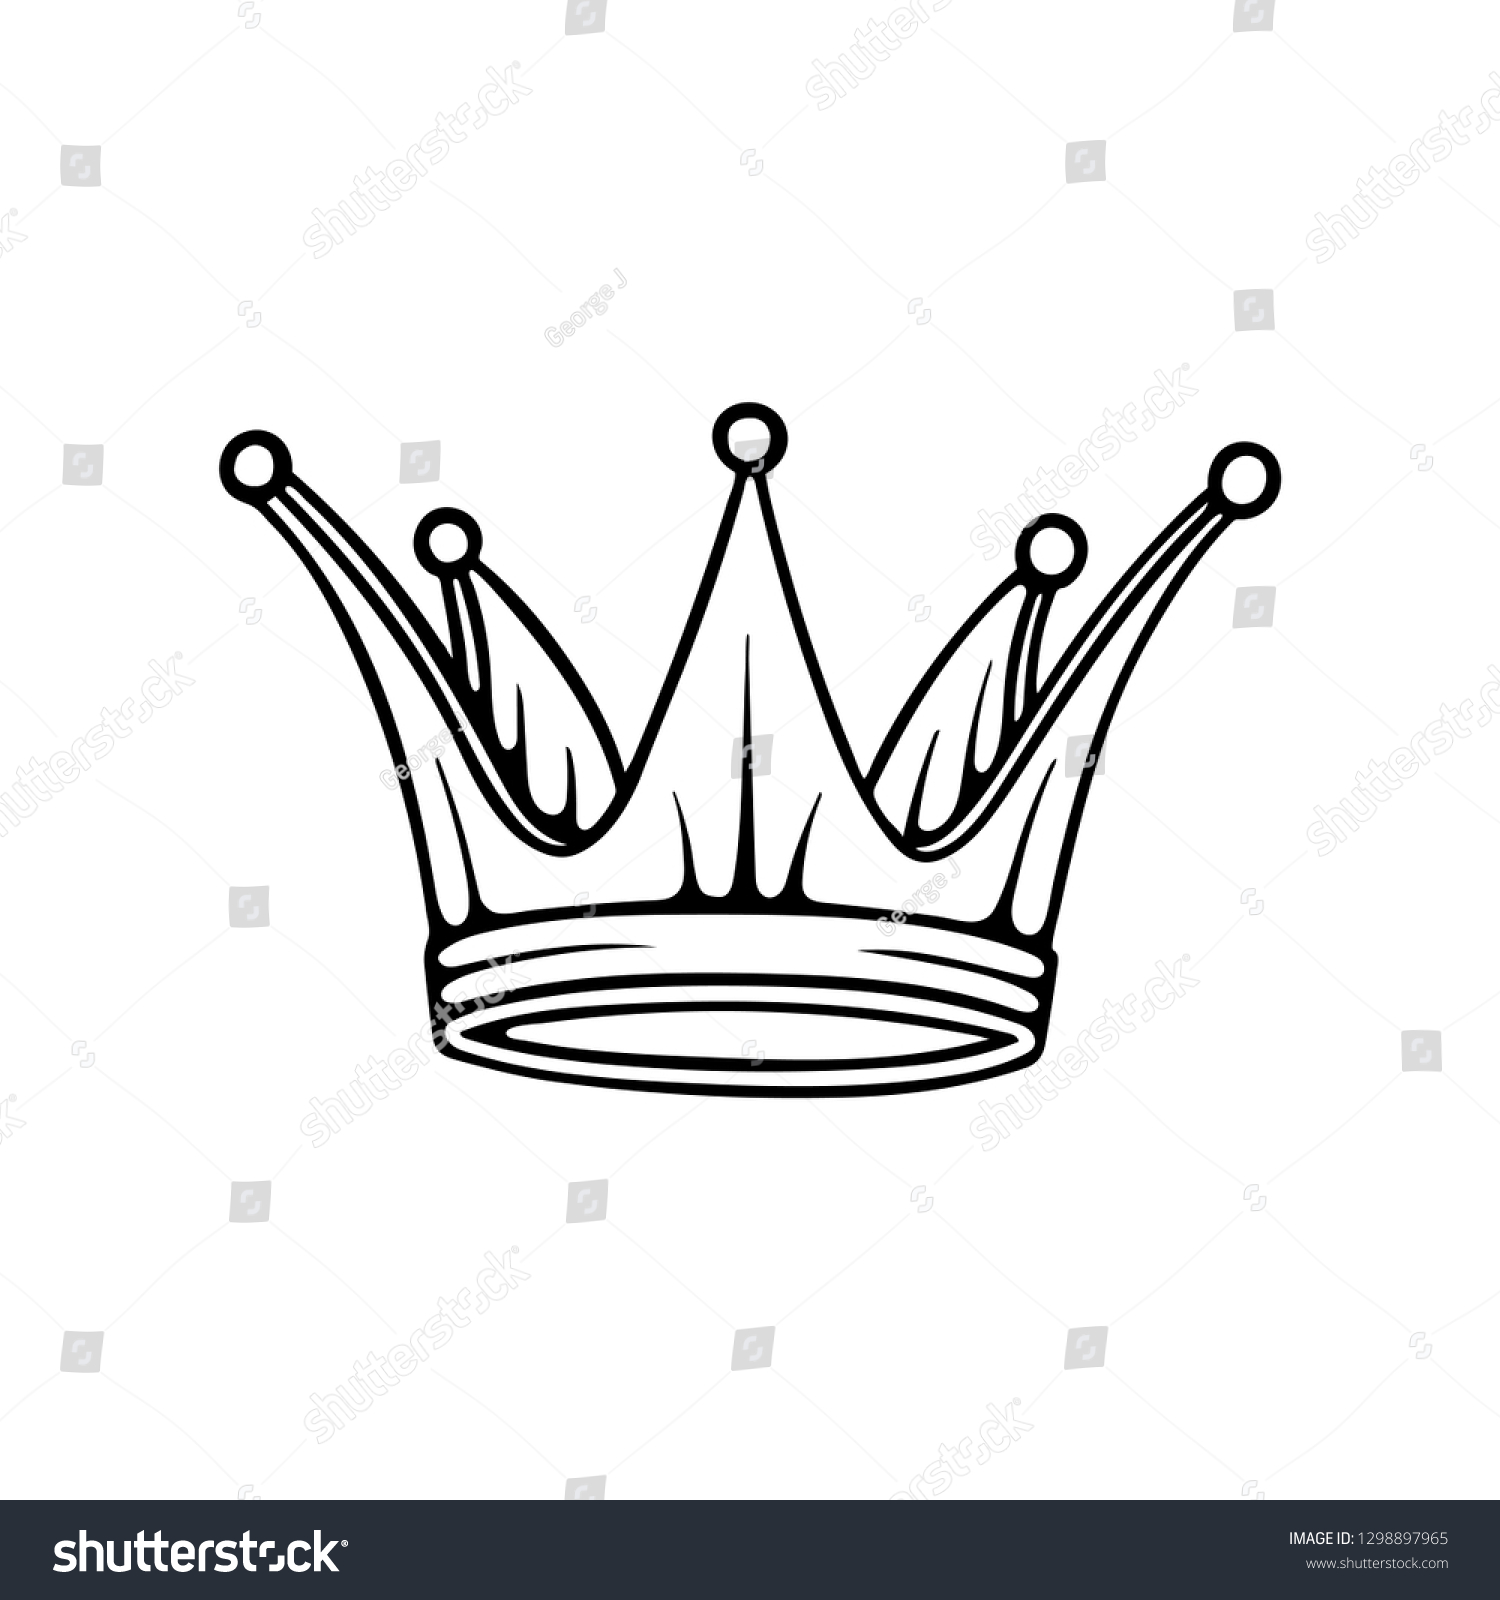 Golden Crown King Crown Hand Drawn Stock Vector (Royalty Free ...